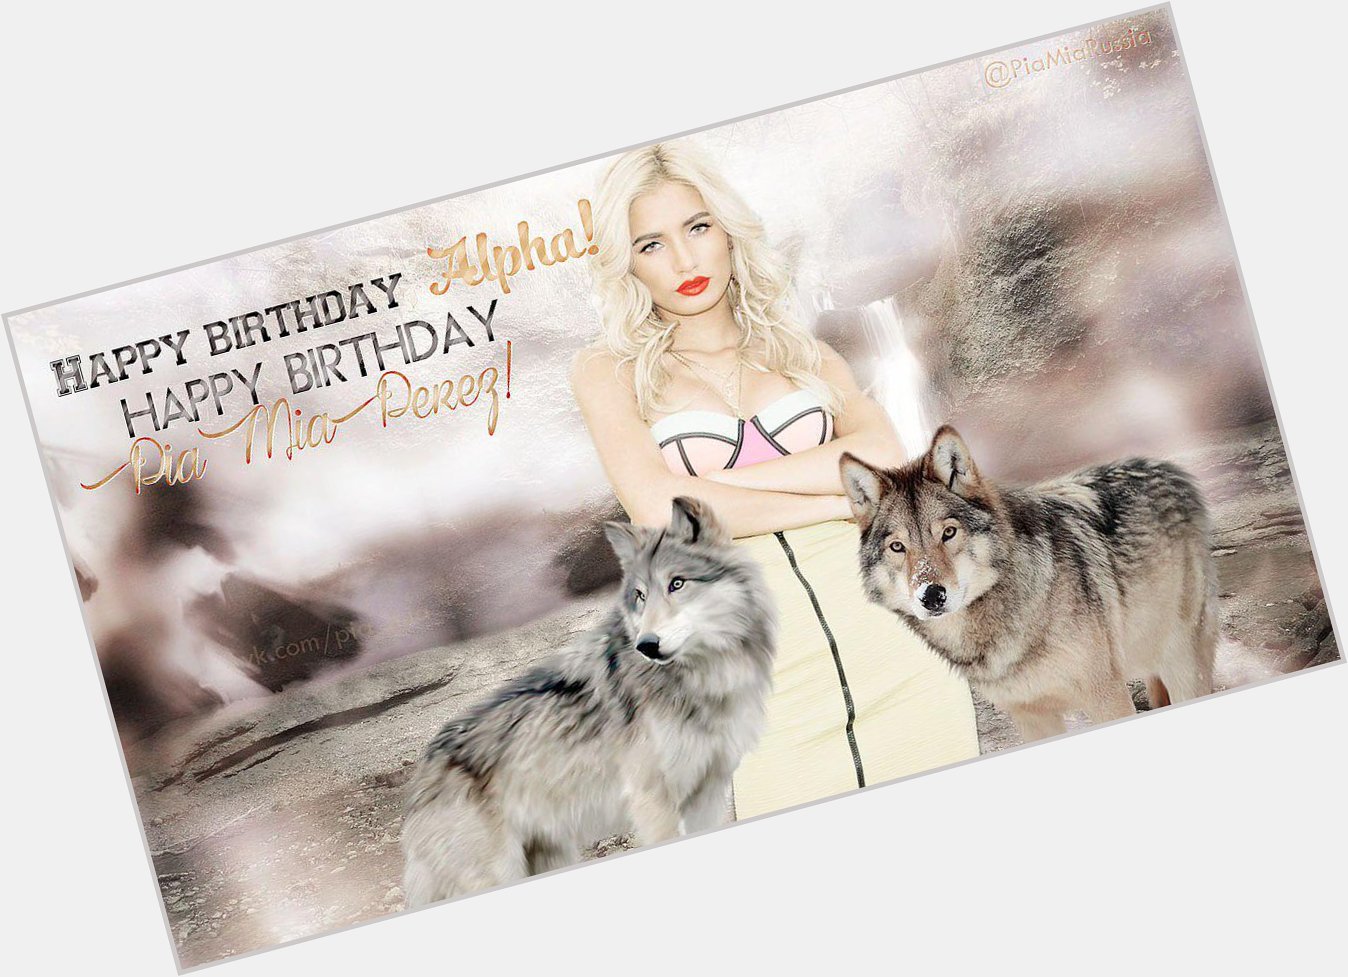 Happy Birthday Pia Mia from your Russian peeps! Check out our birthday video present for U!  